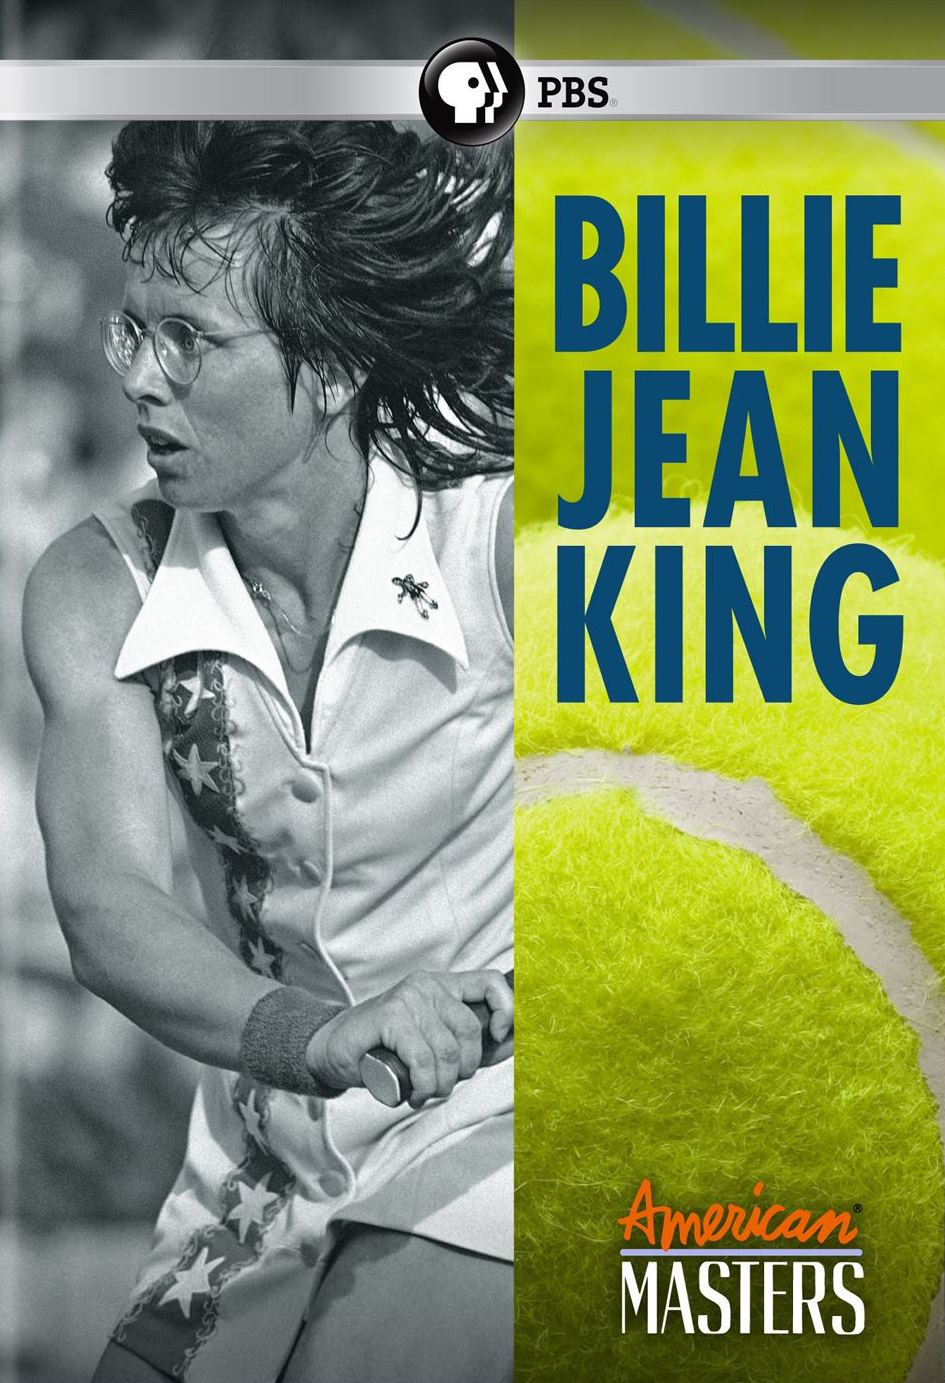 Billie Jean King Cup Playoffs Moved To April As Impact Of Pandemic Continues